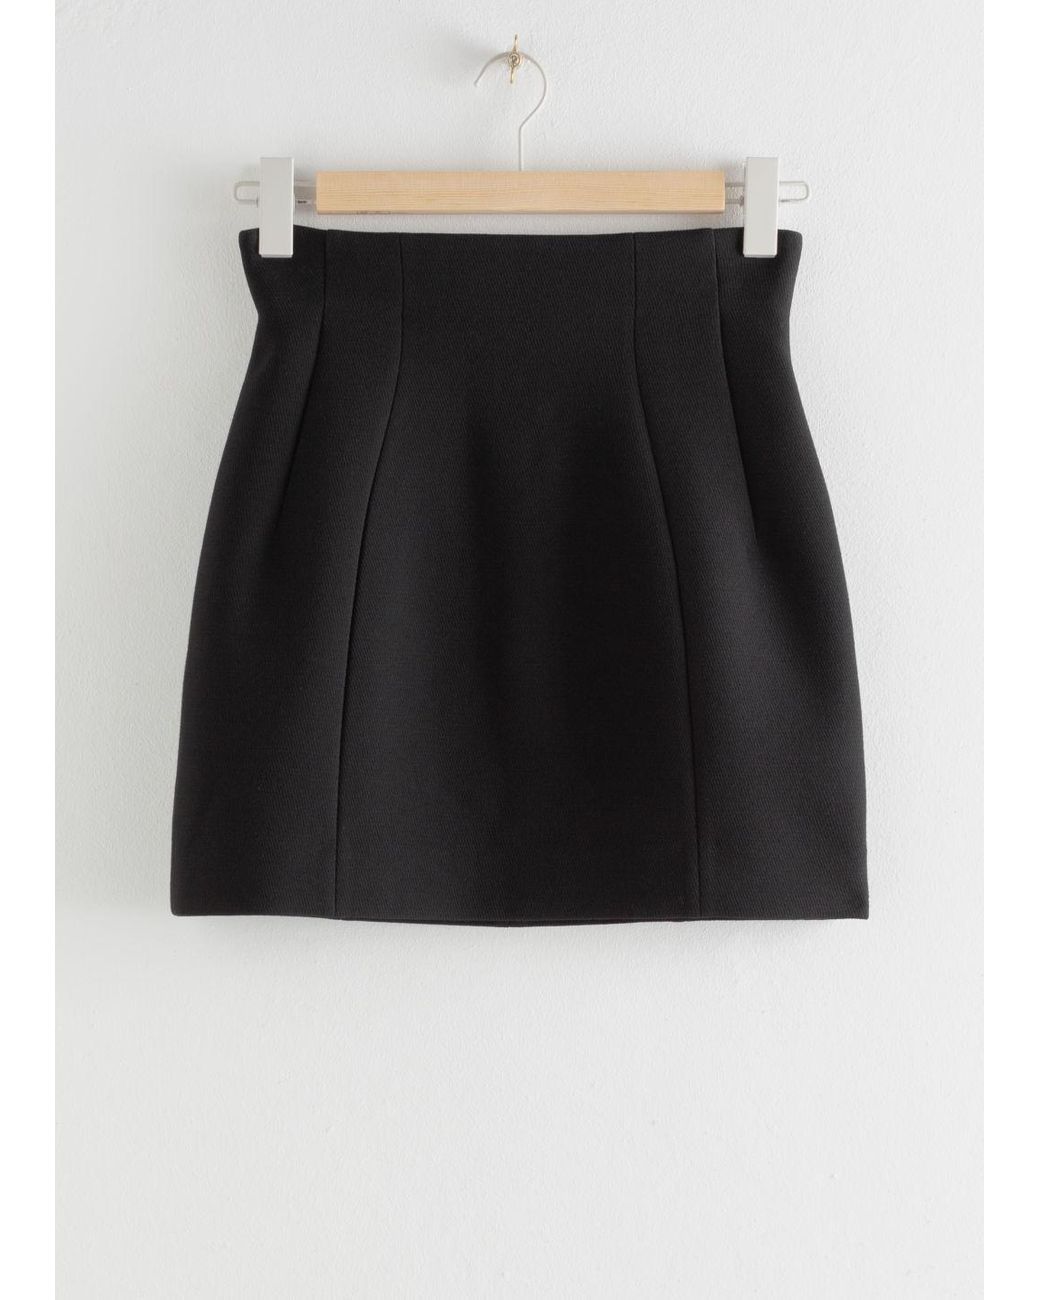 & Other Stories Structured High Waisted Mini Skirt in Black | Lyst